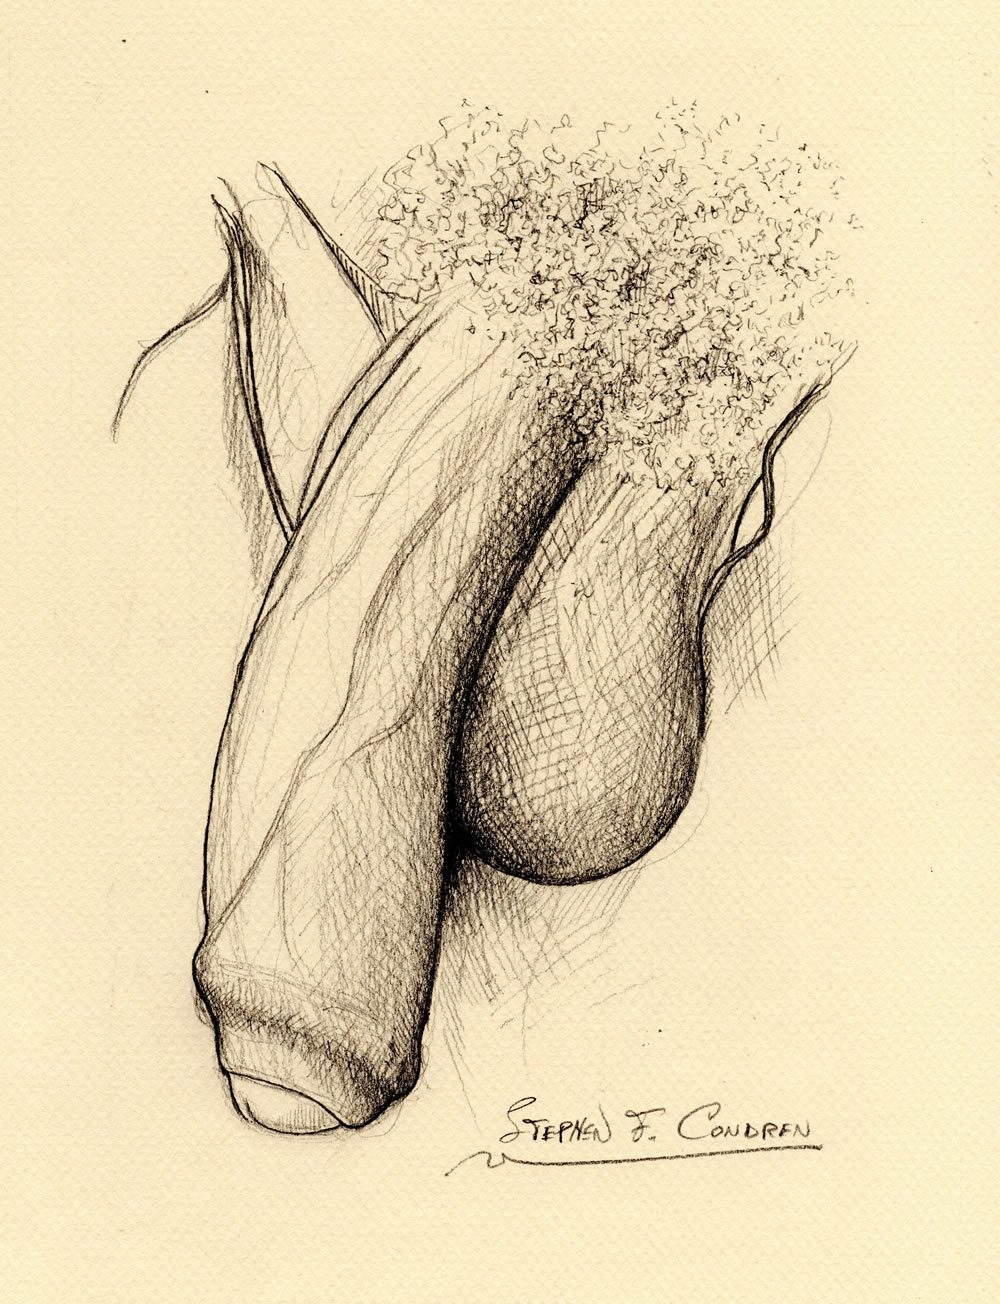 Pencil drawing of large penis with big hairy balls that is soft or flaccid. There are large veins all over the shaft of the cock.